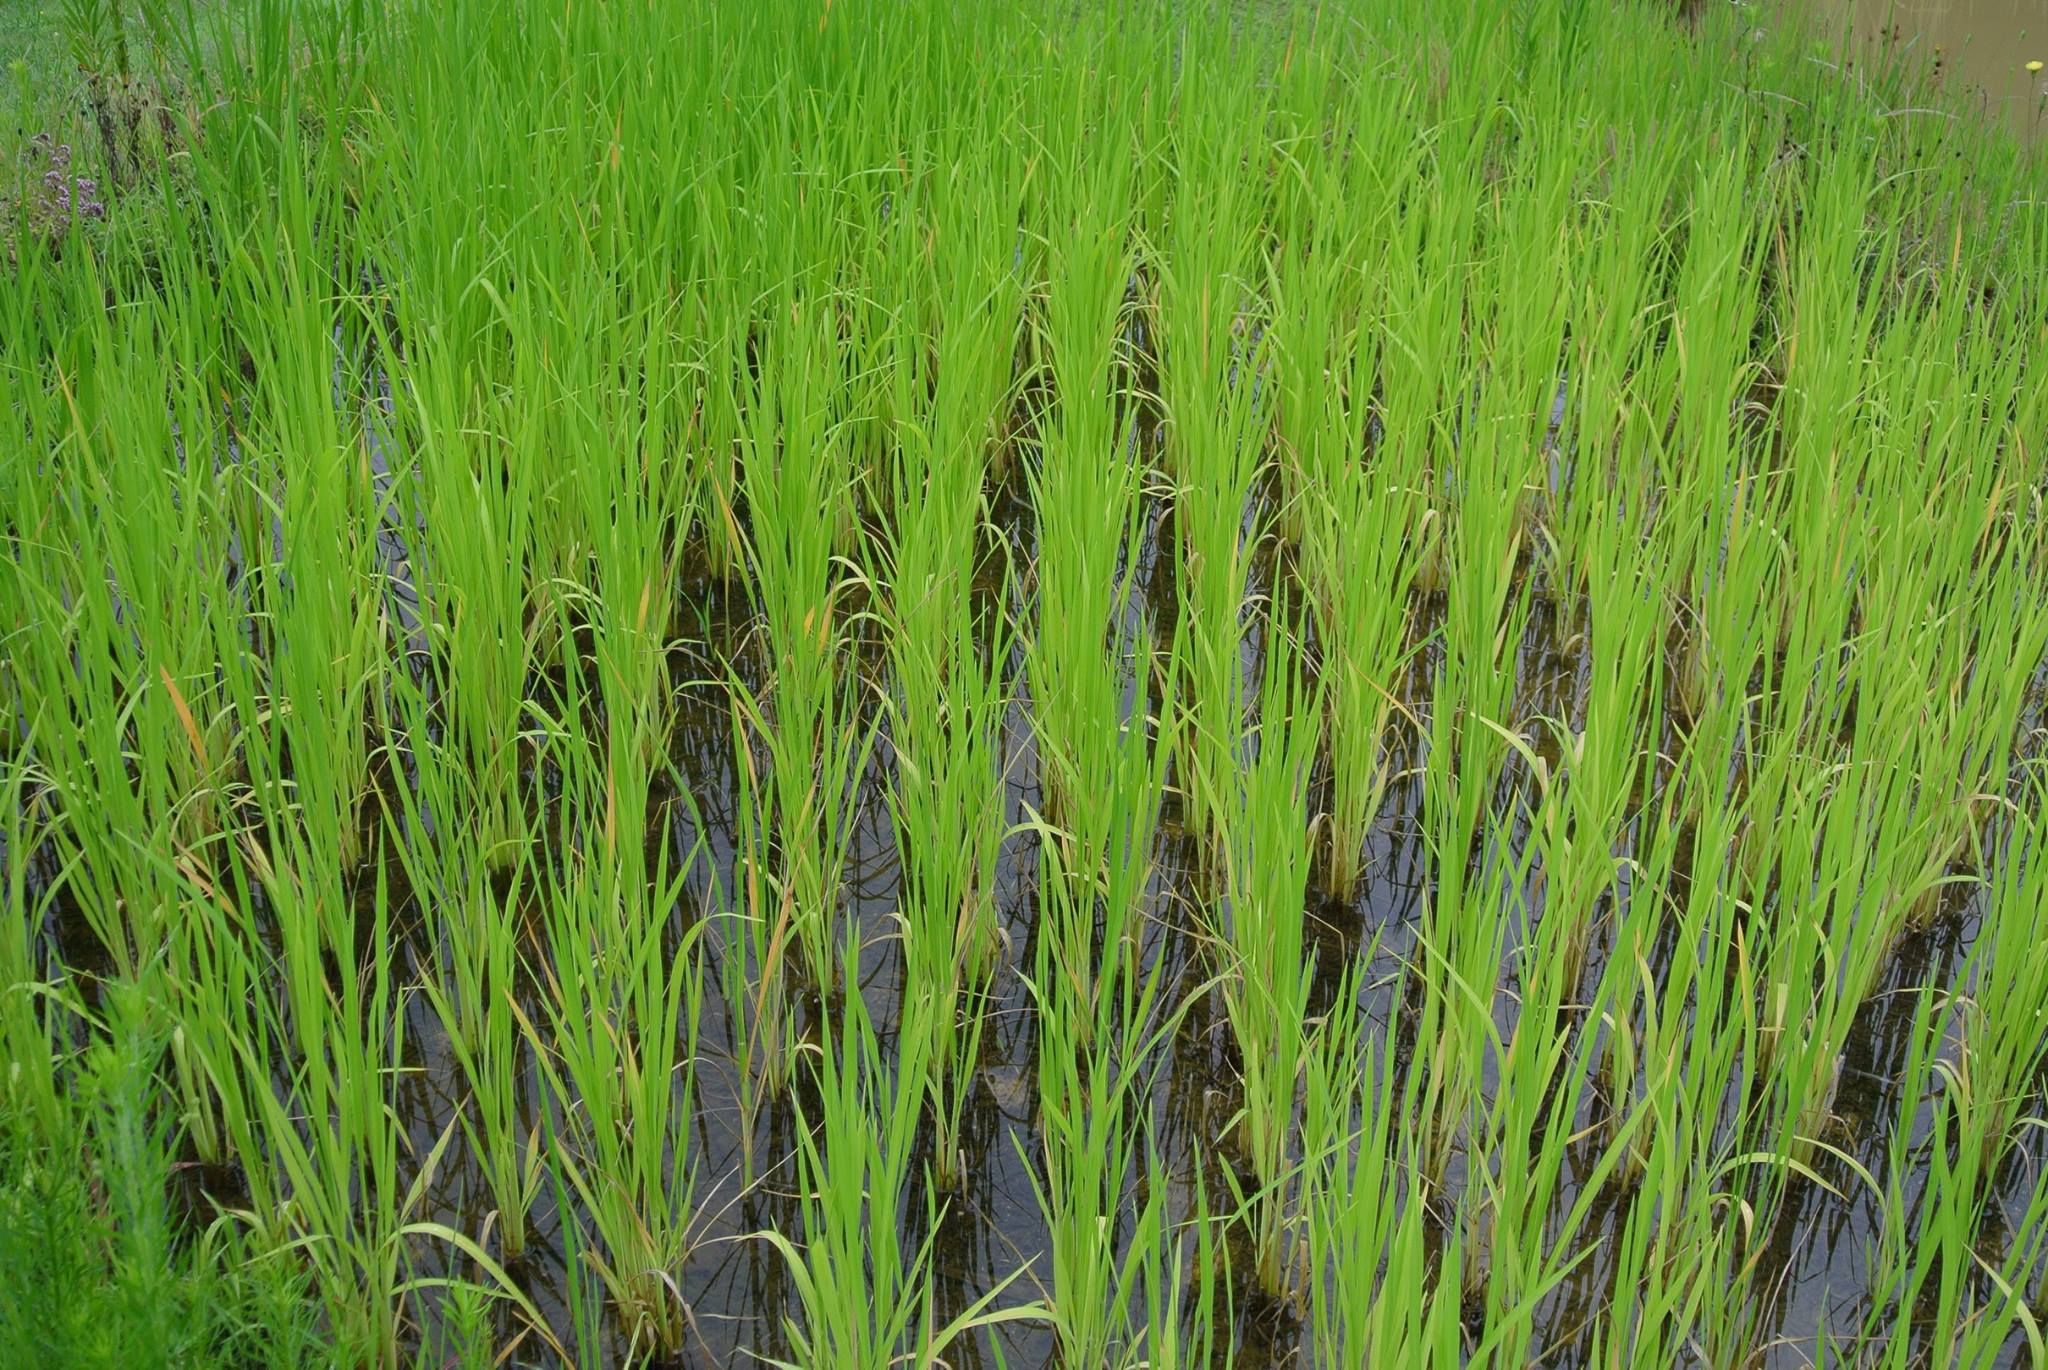  Paddies about a month after rice plants were transplanted 